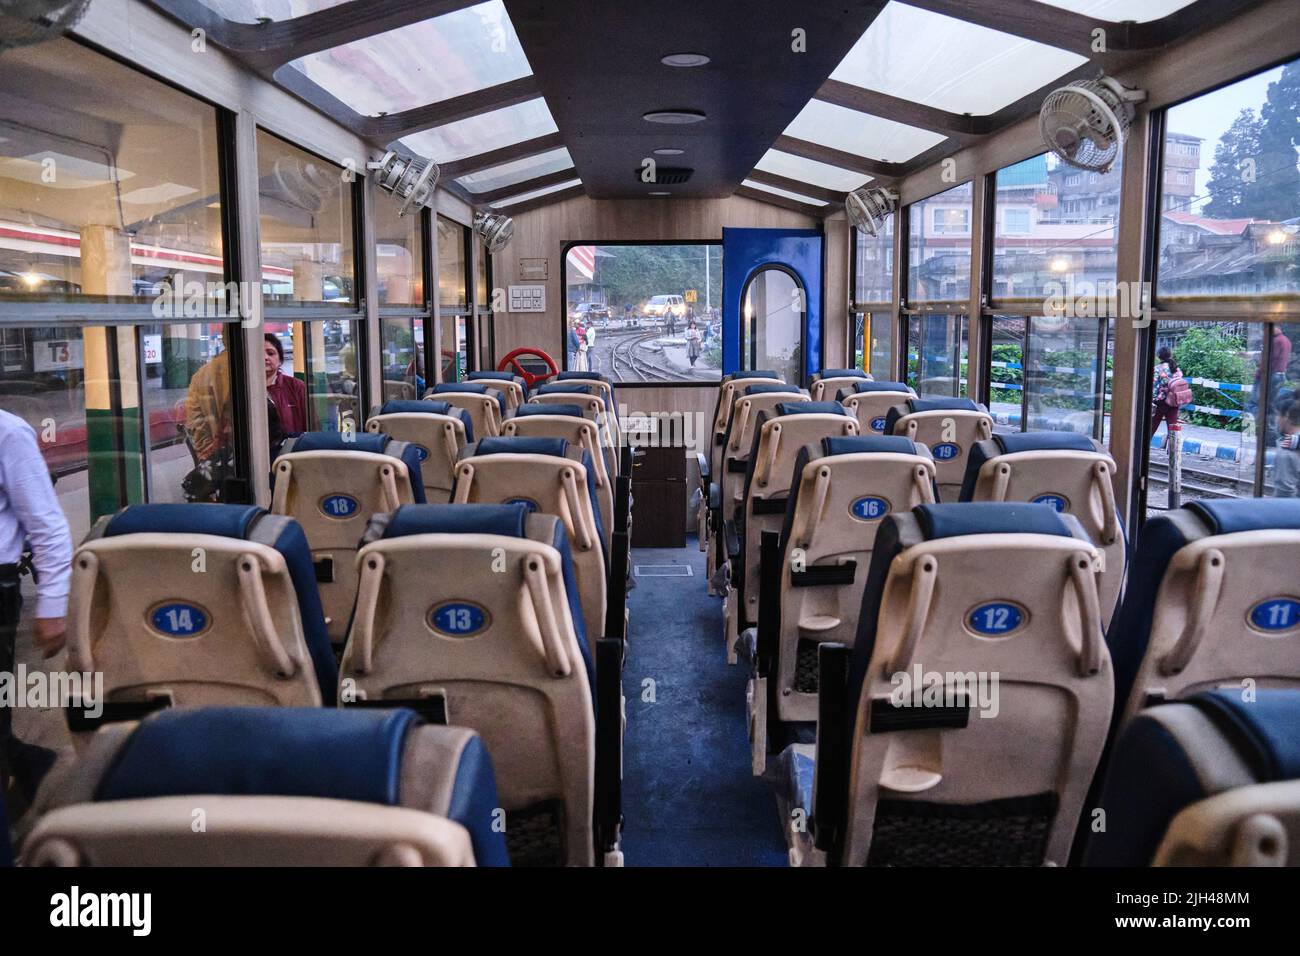 DARJEELING, INDIAN -June 22, Inside the toy train have a chair car sitting arrangement in the toy train himalayan queen of darjeeling which is taken b Stock Photo